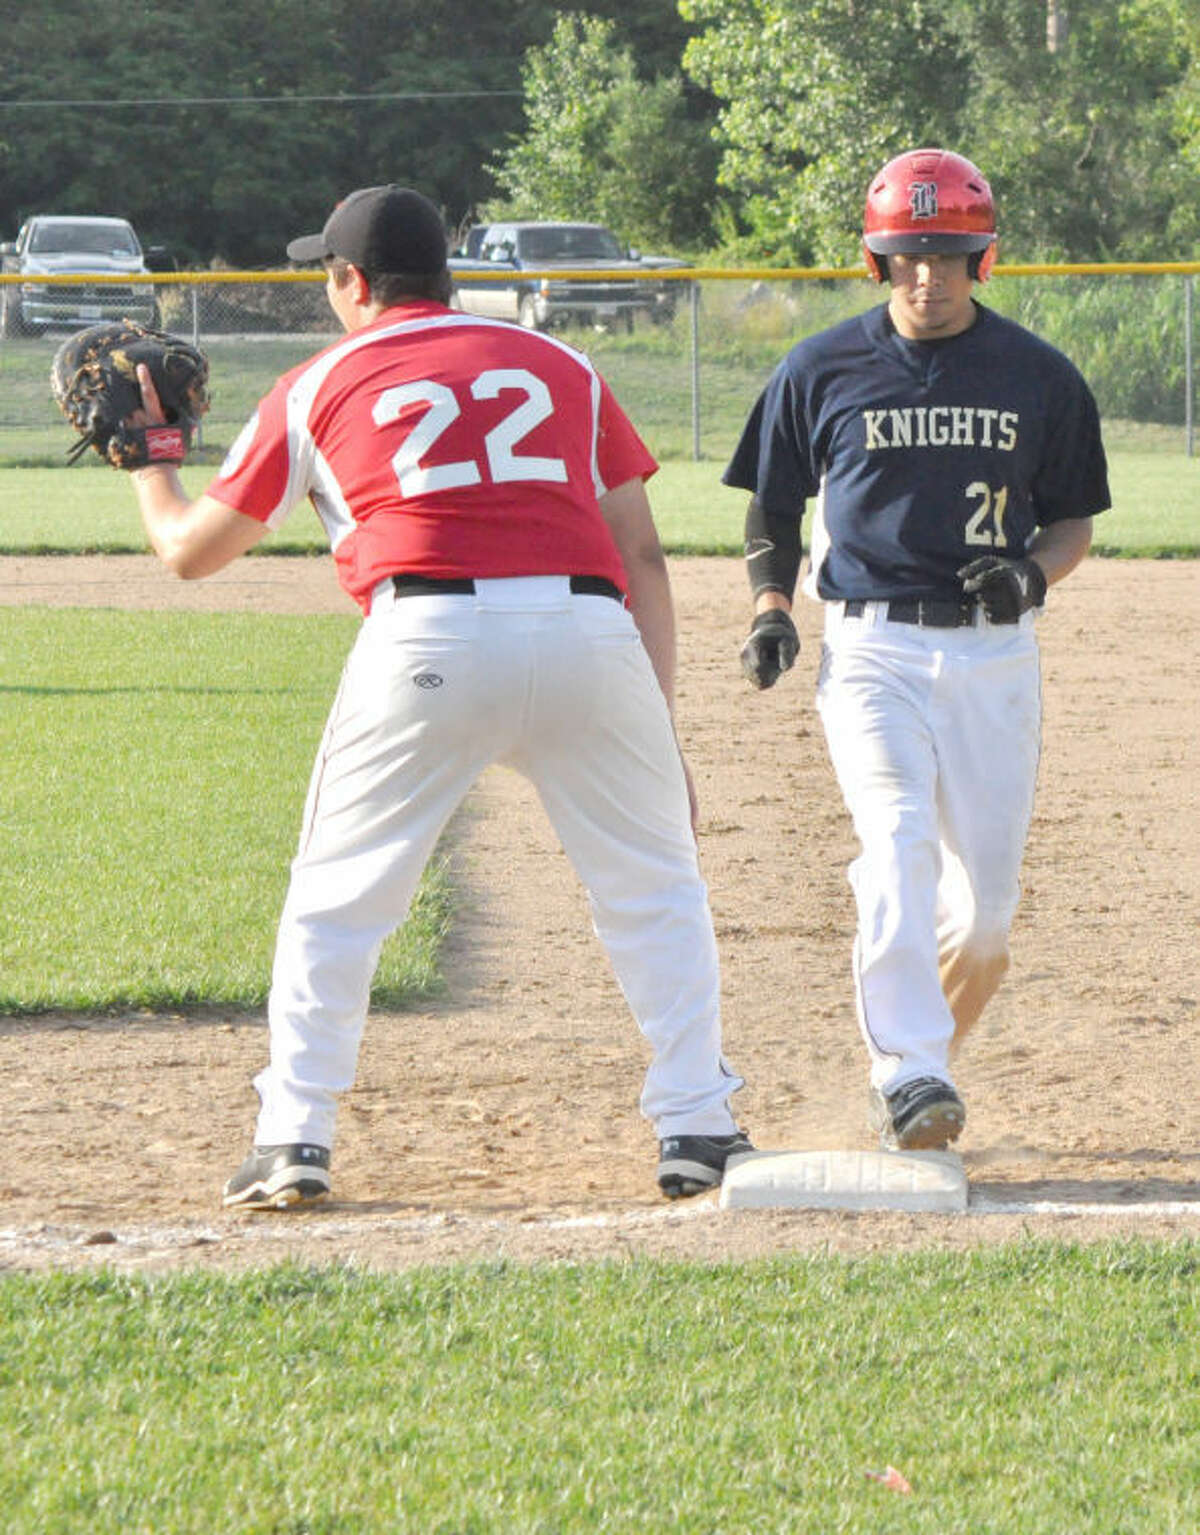 Post 435’s Matt Mokriakow gets back to first base on a pickoff attempt by Troy on Wednesday.